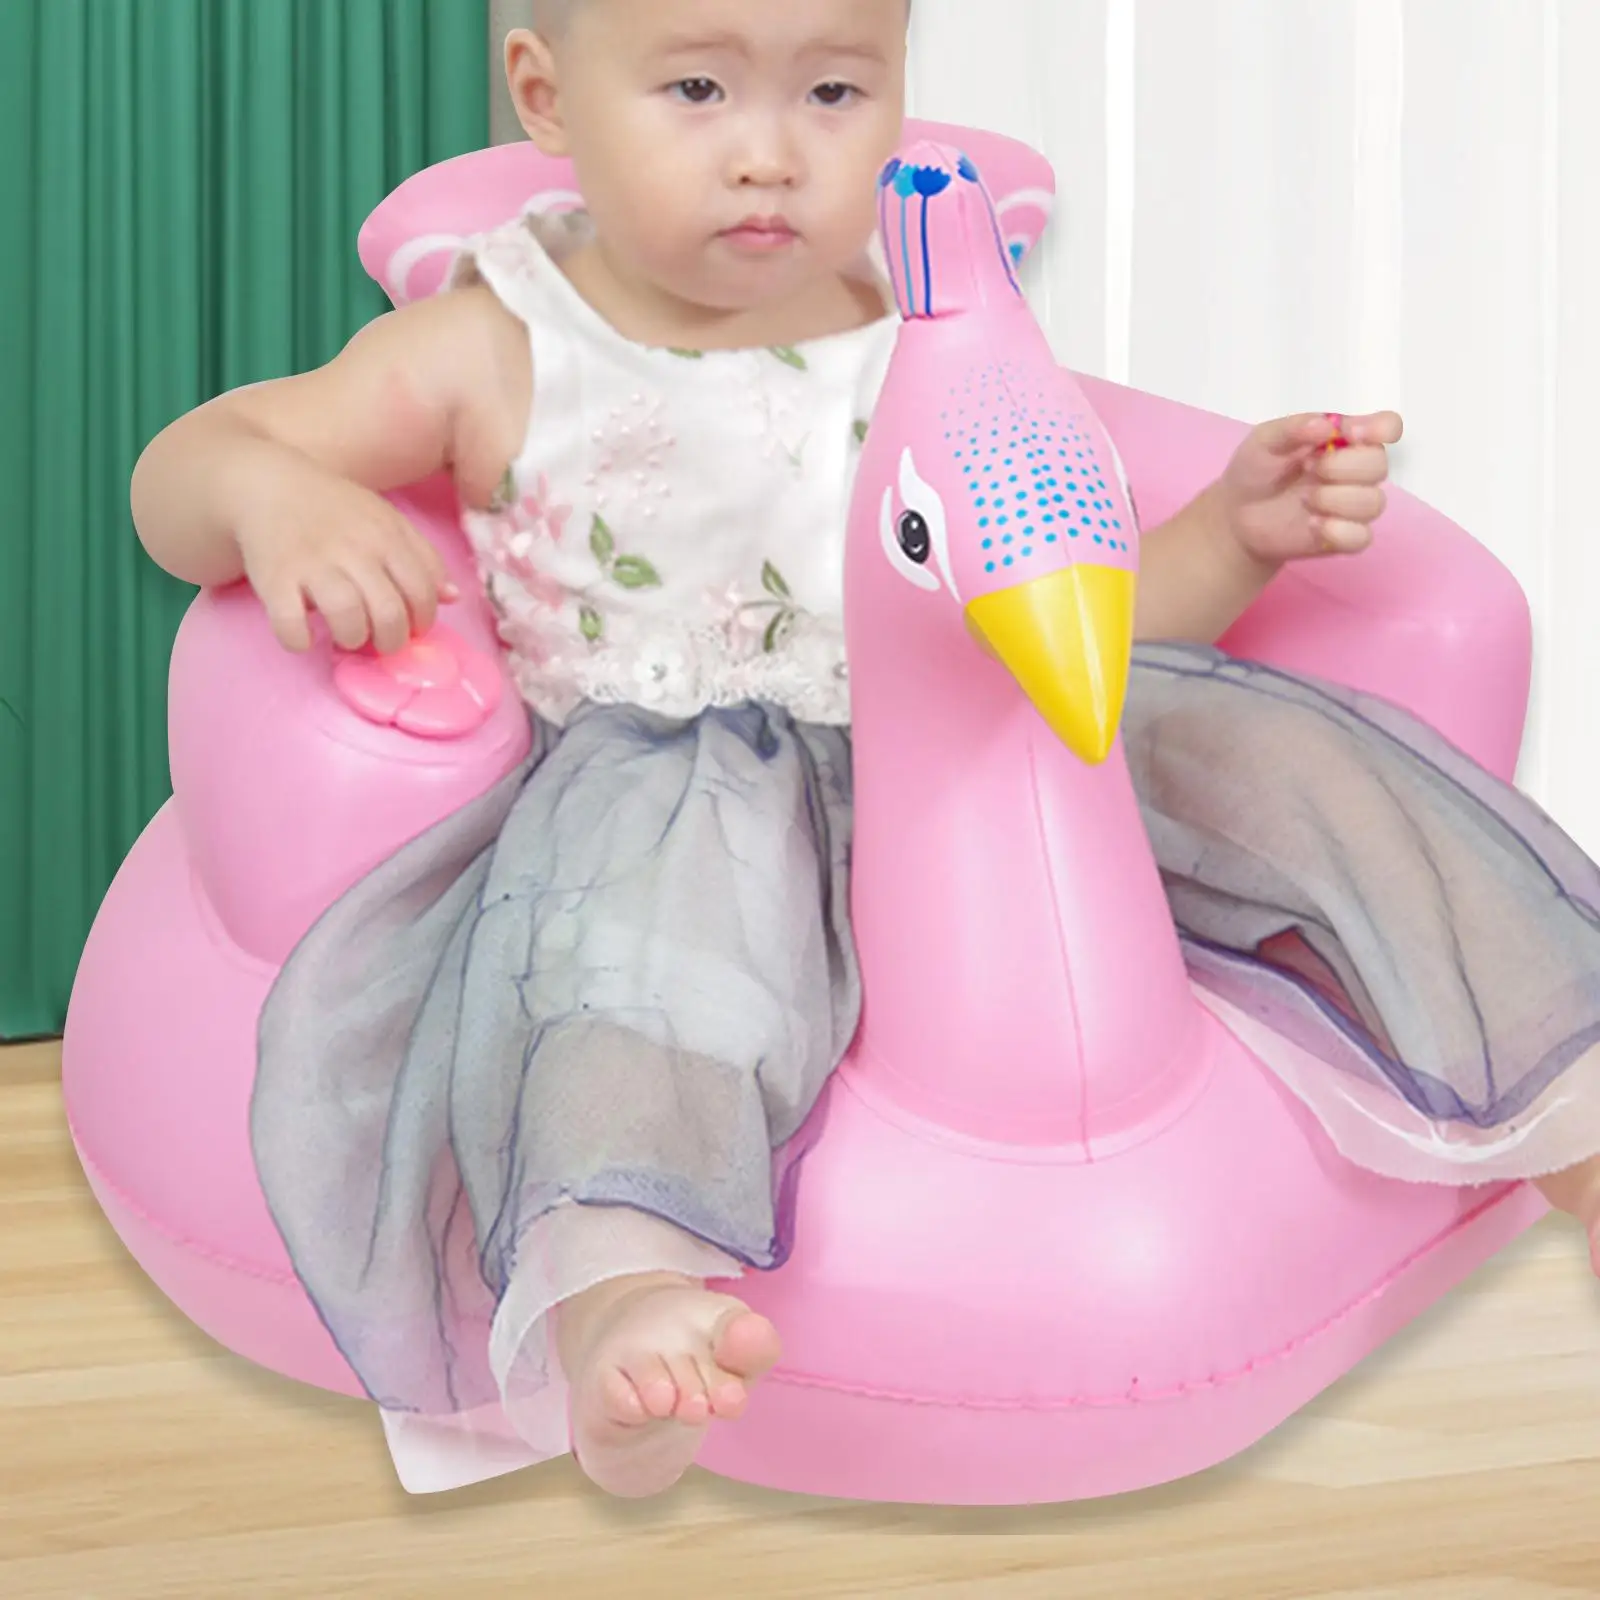 Baby Inflatable Seat Baby Shower Chair Floor Seater Playing Game Toy Chair for Sitting up Floor Seat Infant Floor Seats